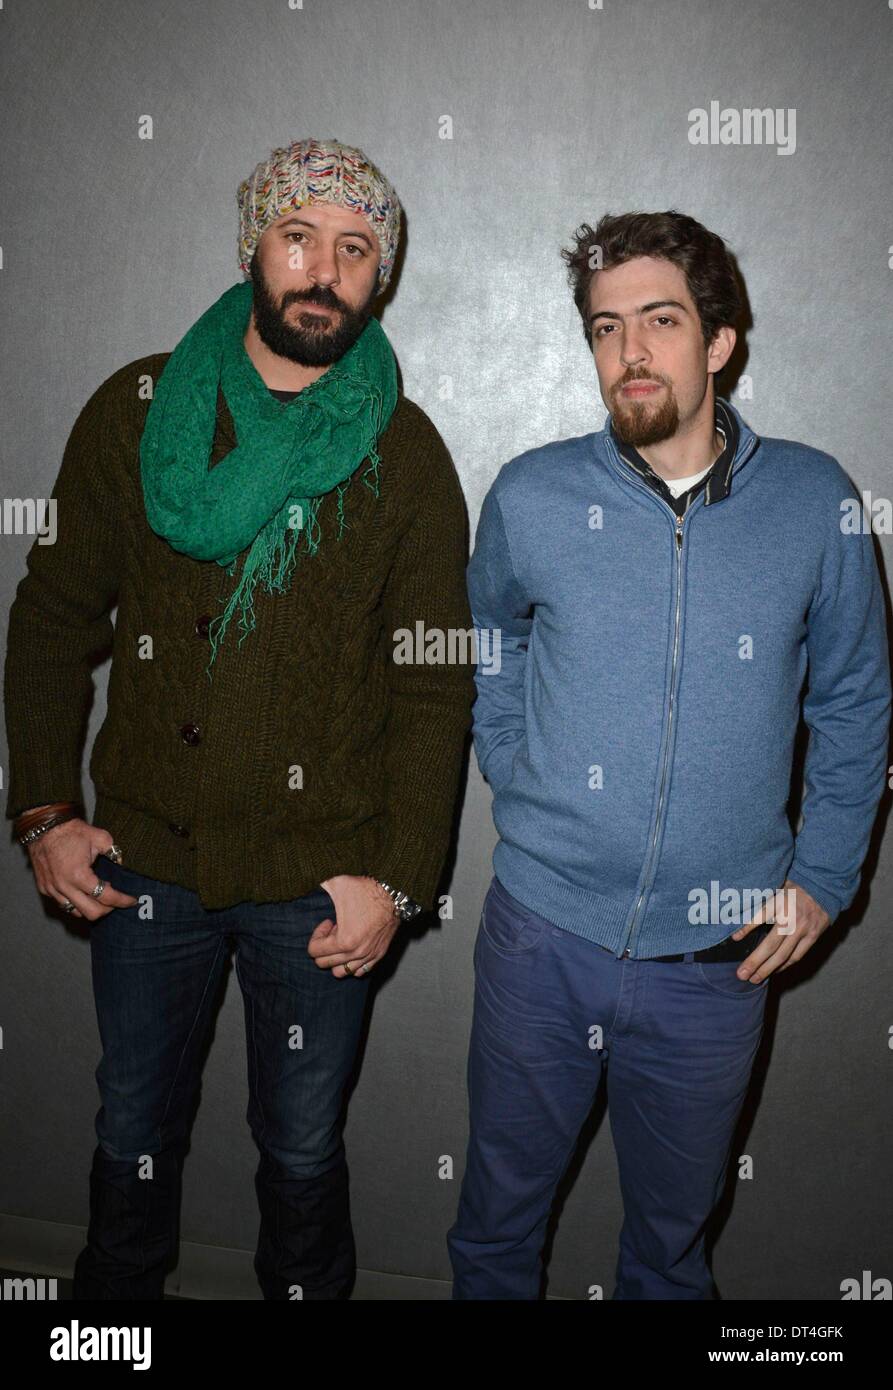 New York, NY, USA. 7th Feb, 2014. Ali Suliman, Guy Elhanan at arrivals for MARS AT SUNRISE Premiere Screening, The Quad Cinema, New York, NY February 7, 2014. Credit:  Derek Storm/Everett Collection/Alamy Live News Stock Photo